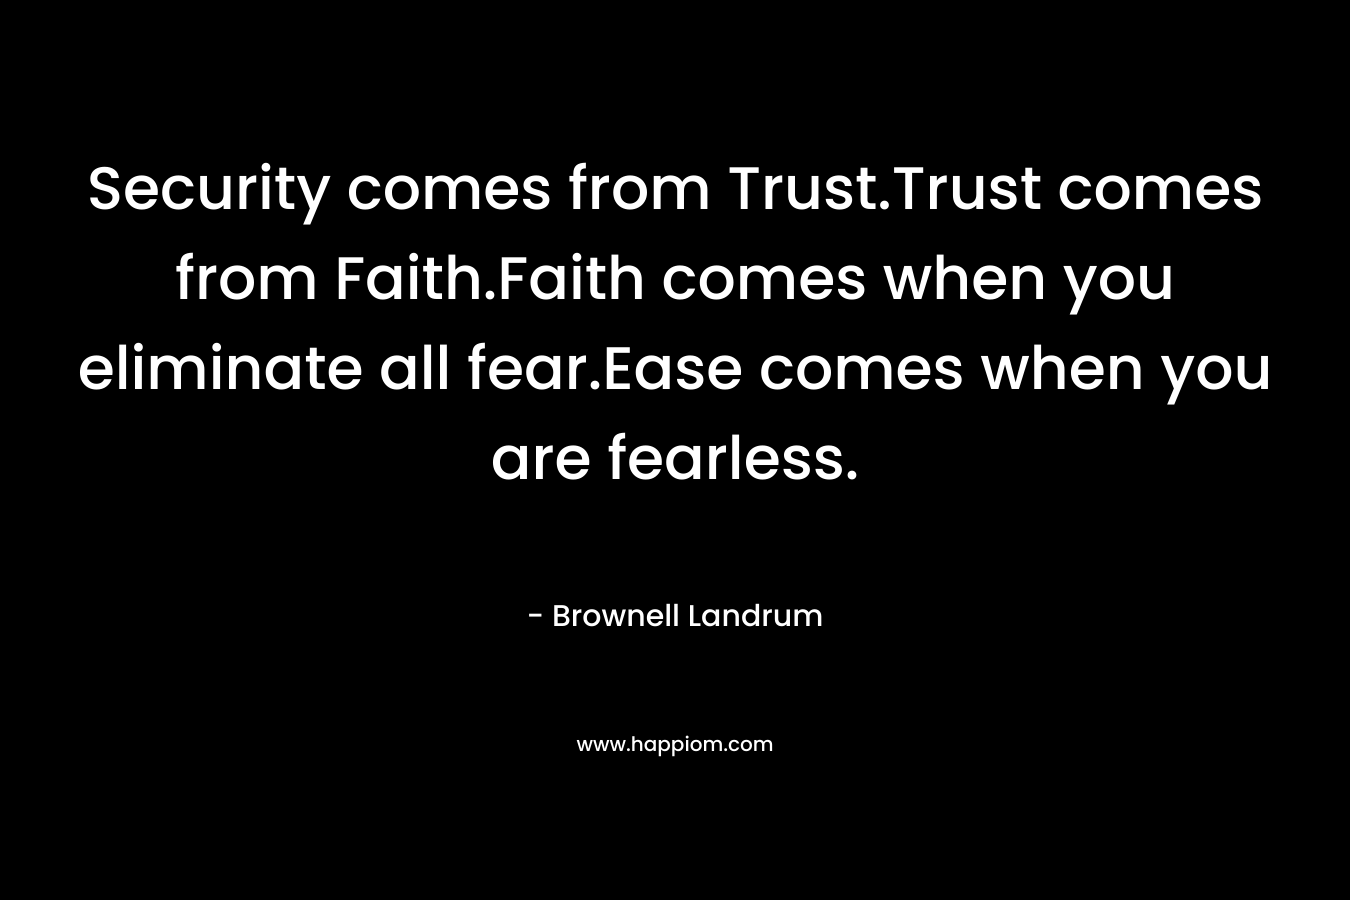 Security comes from Trust.Trust comes from Faith.Faith comes when you eliminate all fear.Ease comes when you are fearless.